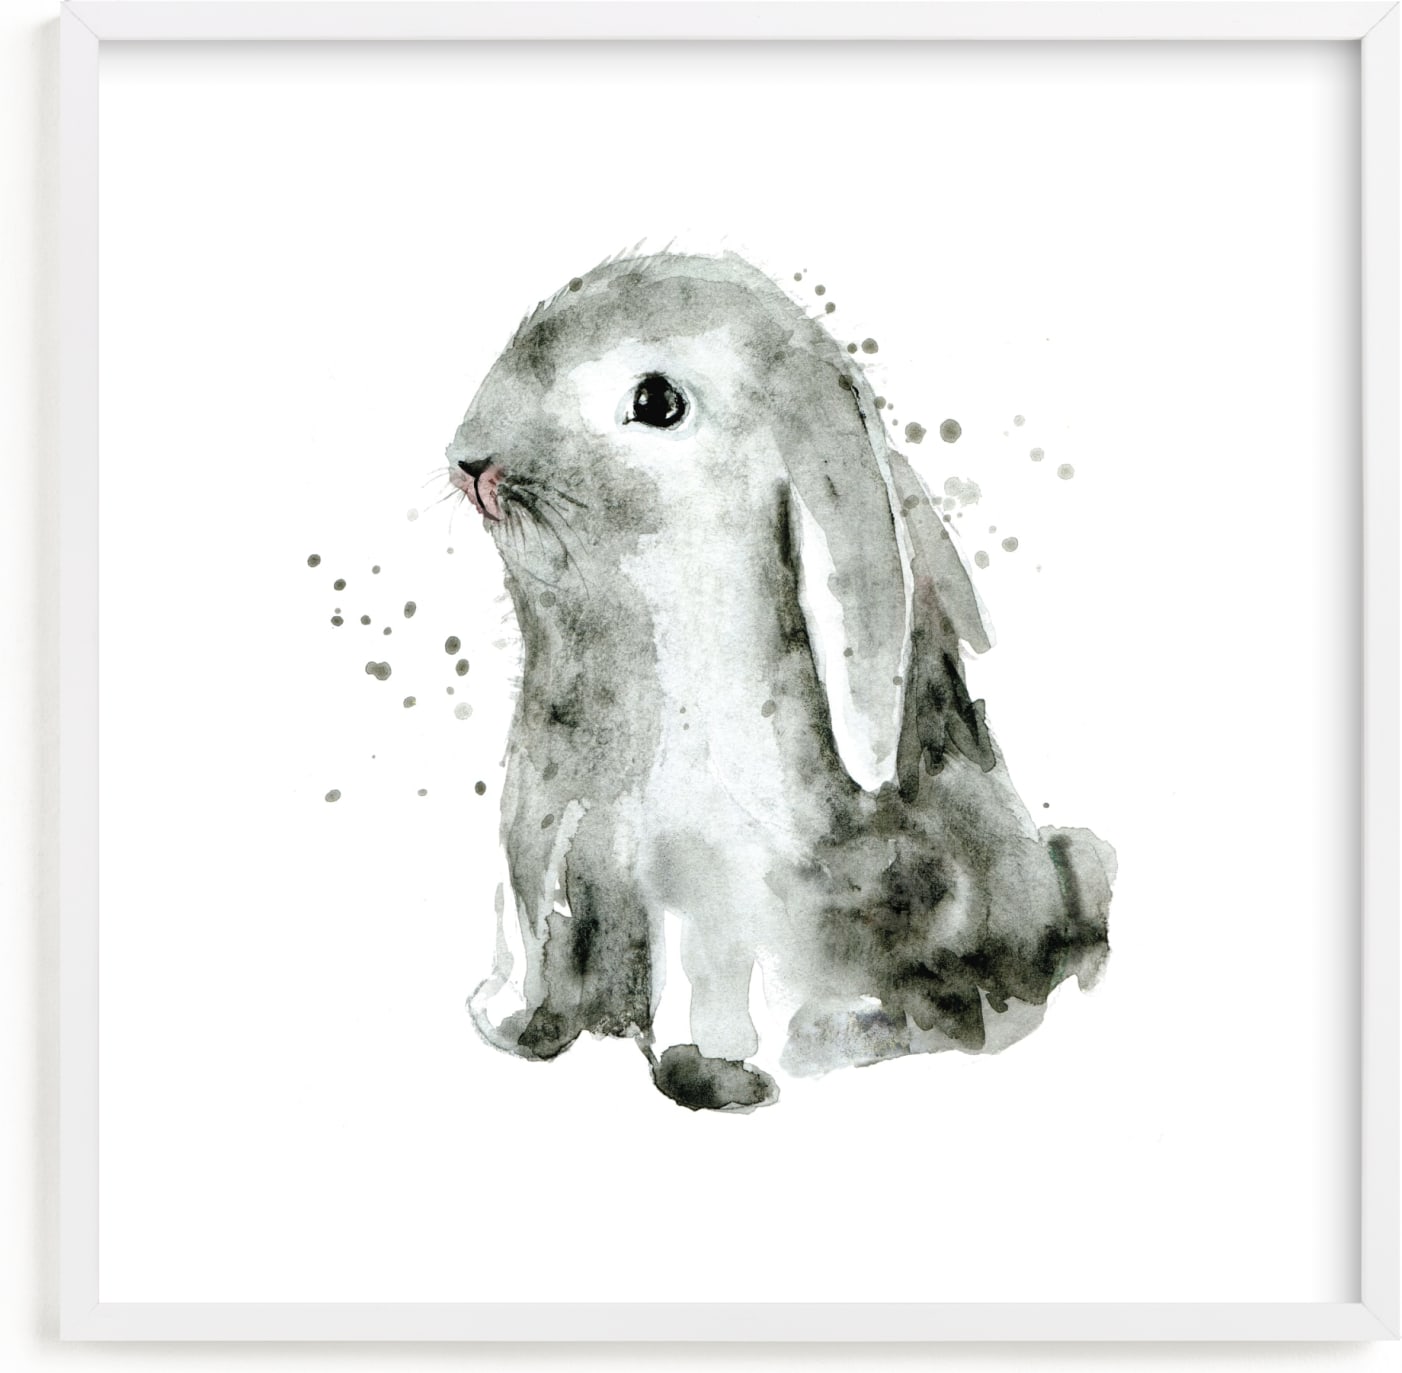 This is a white art by Lulaloo called Bunny1.